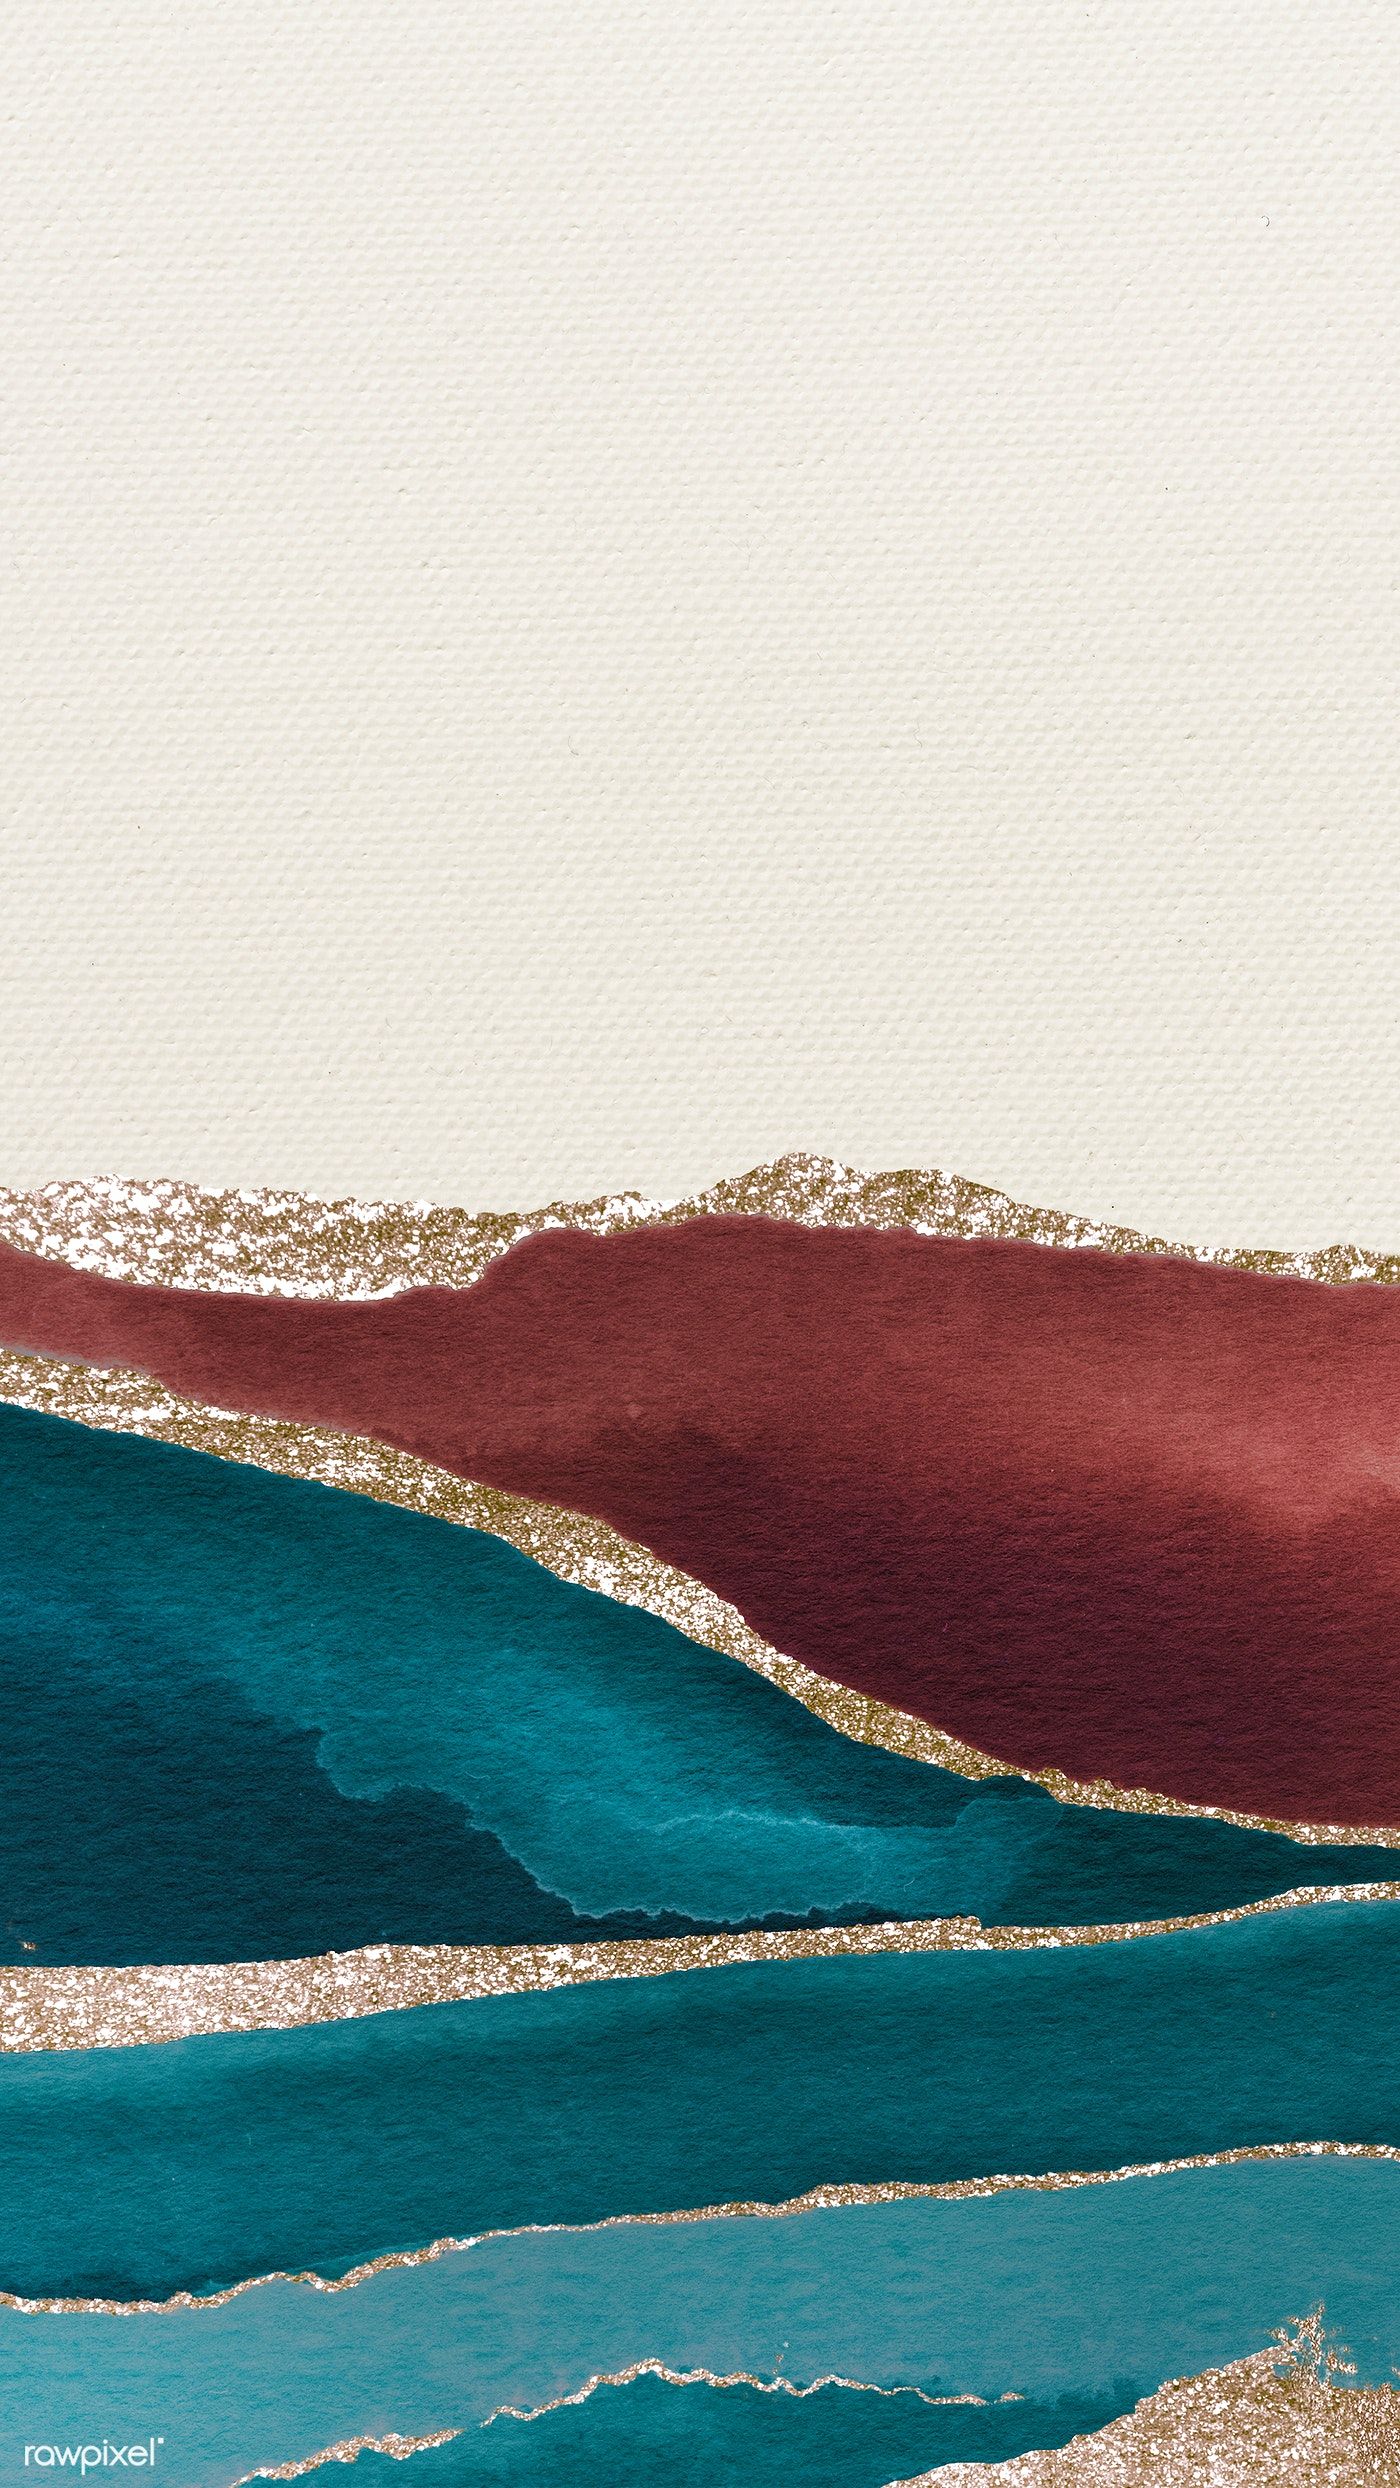 Premium Image Of Shimmering Teal And Brown On White Paper